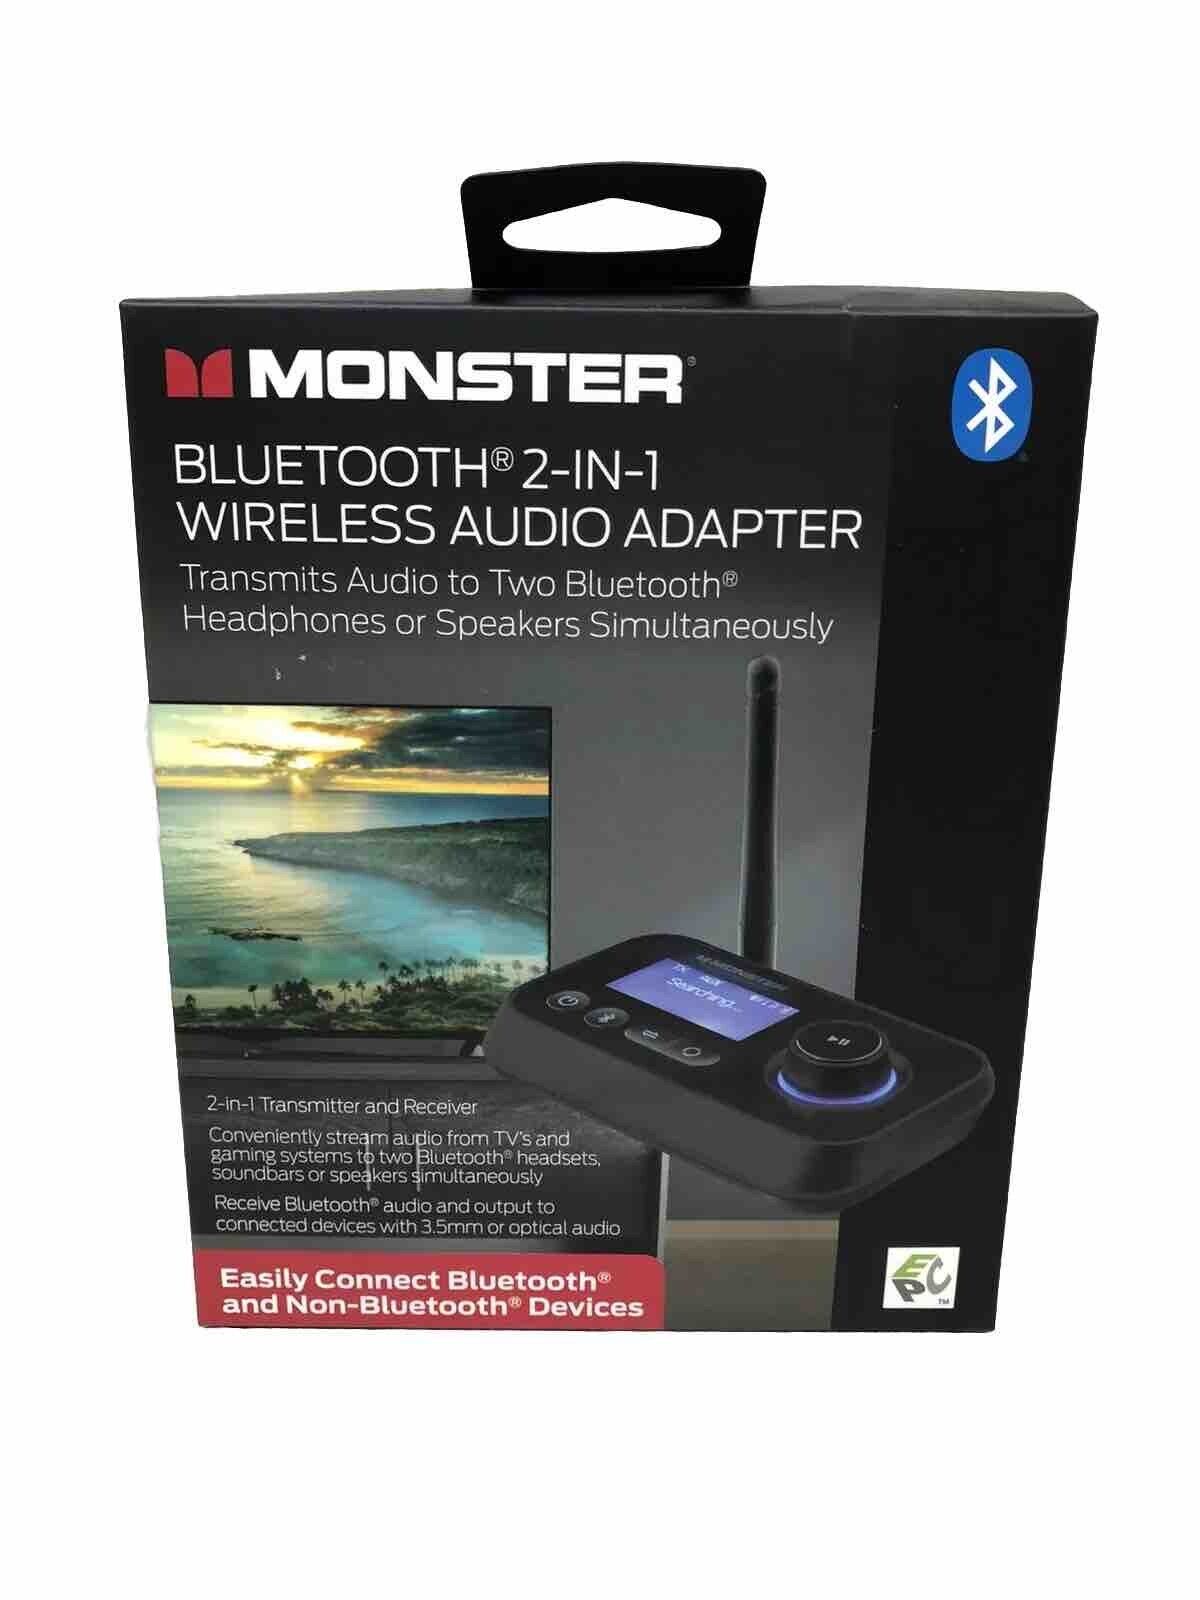 MONSTER - Bluetooth 2-IN-1 Wireless Audio Adapter - New  